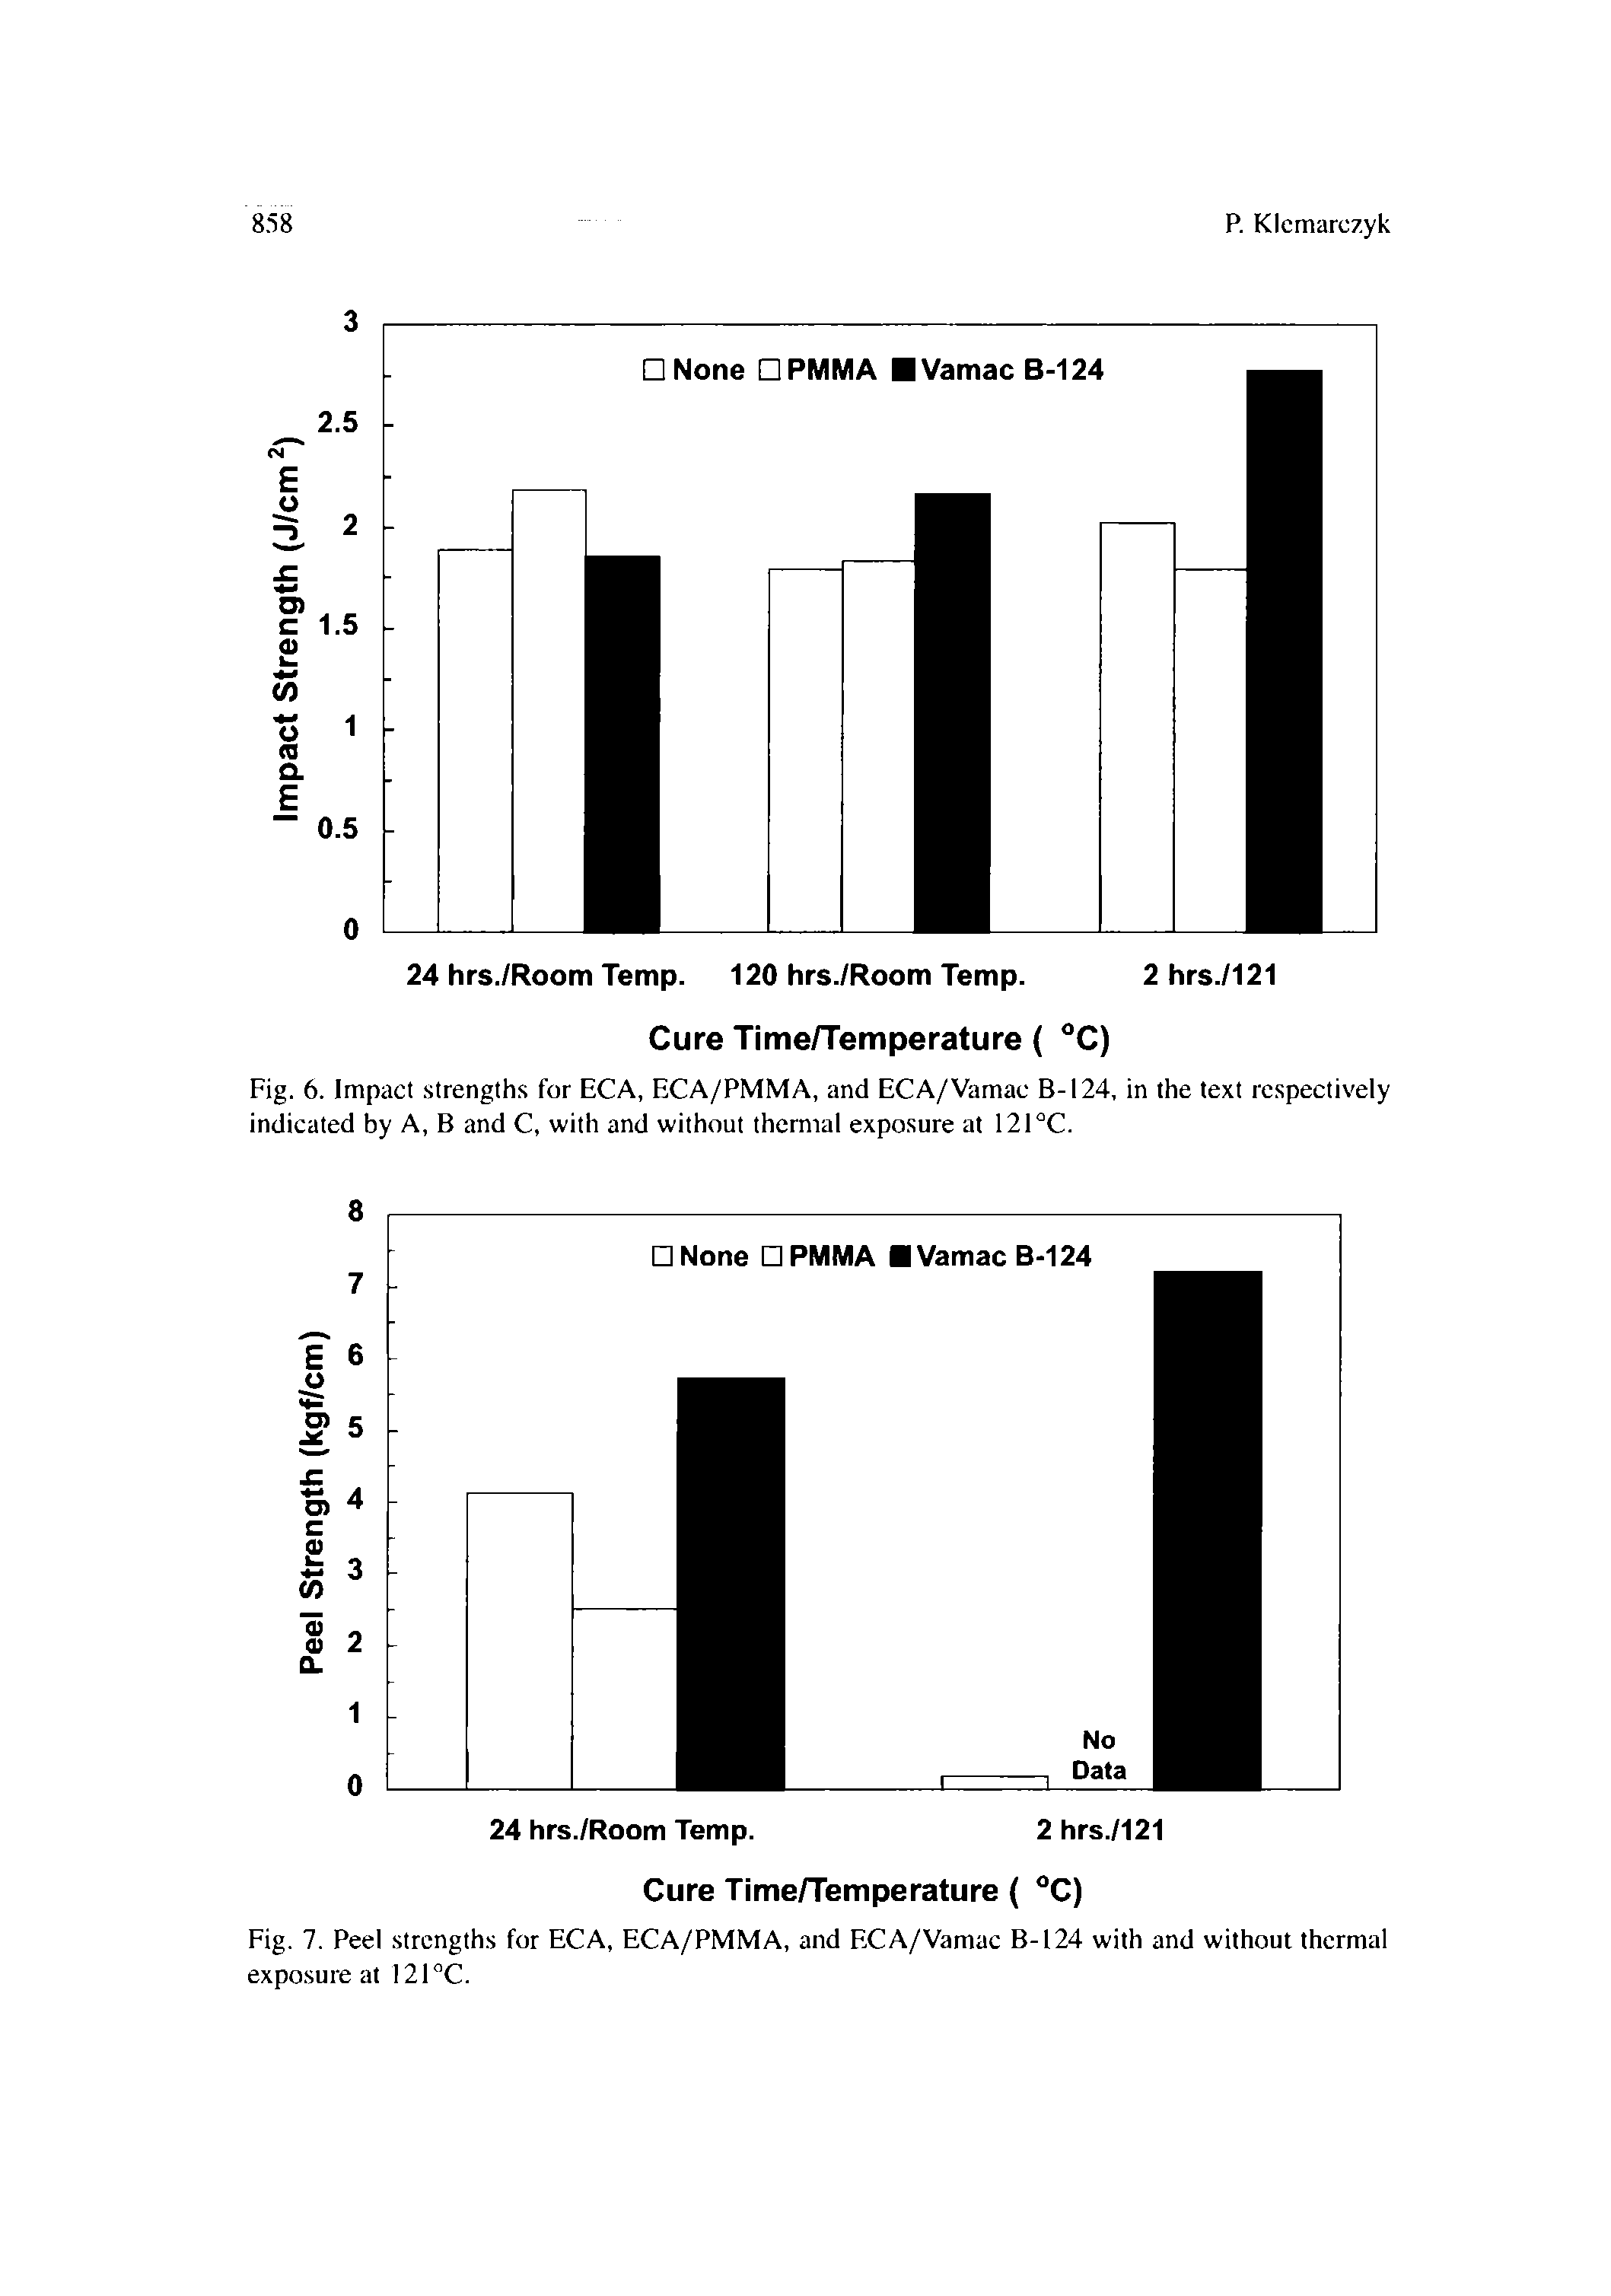 Fig. 6. Impact strengths for ECA, ECA/PMMA, and ECA/Vamac B-124, in the text respectively indicated by A, B and C, with and without thermal exposure at 121°C.